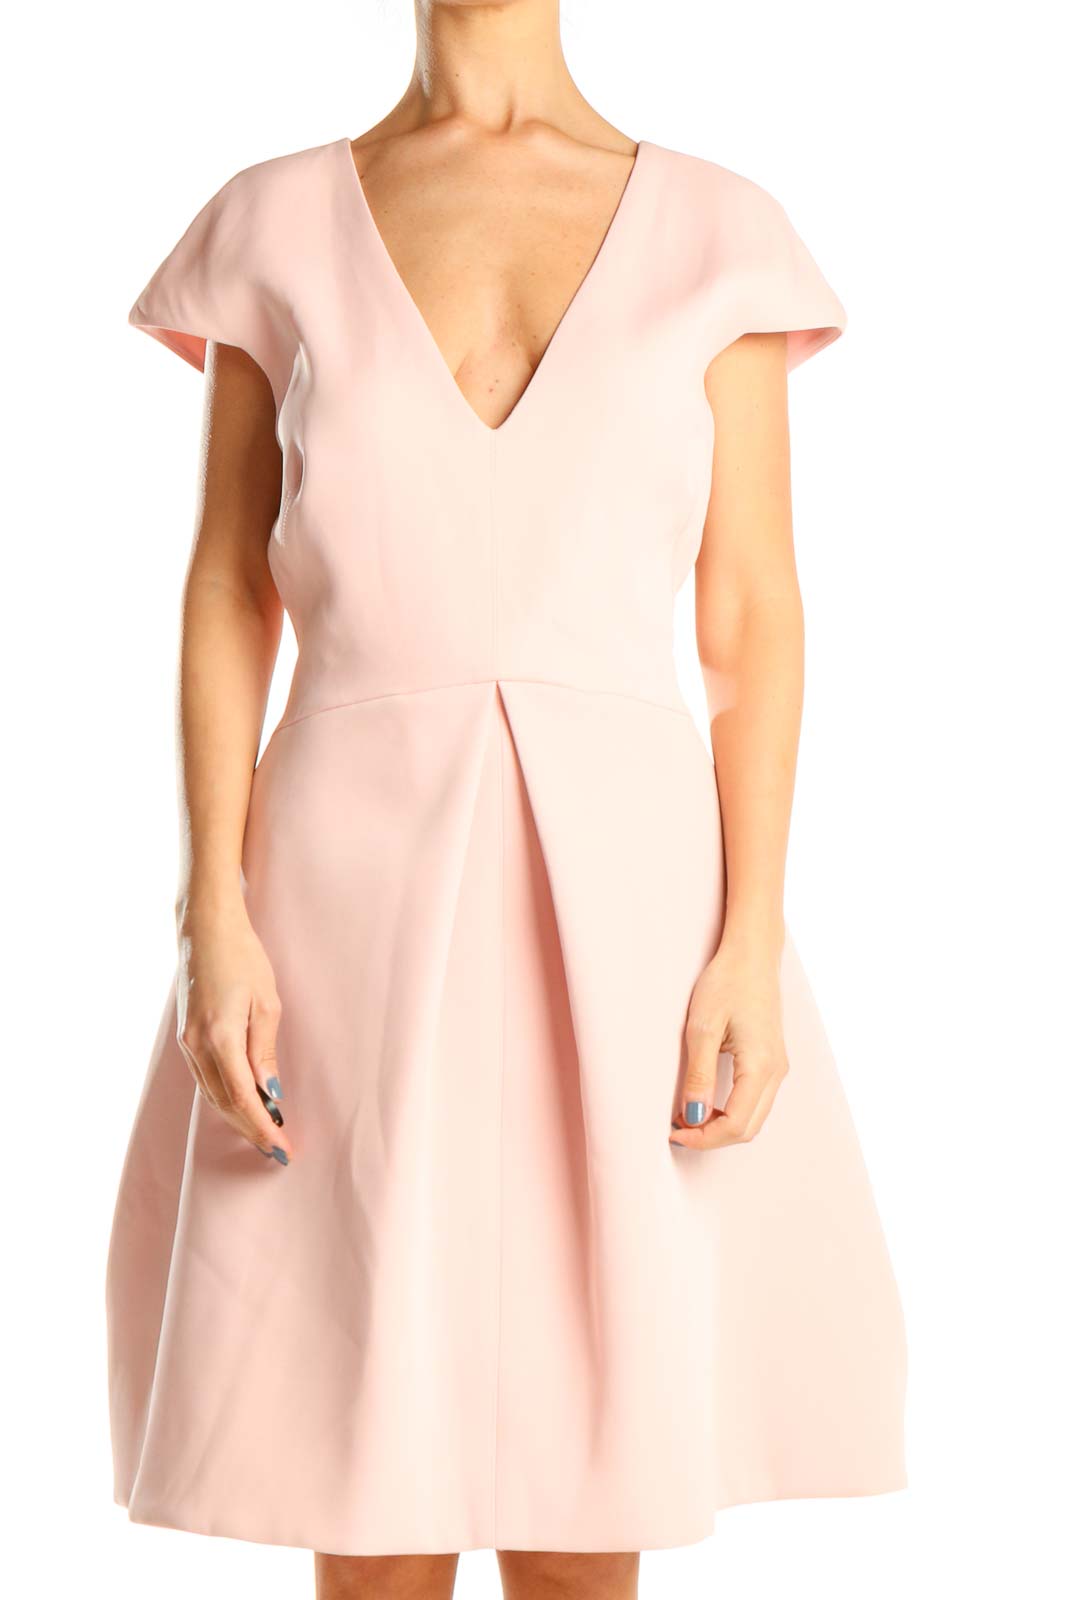 Pink V-Neck Classic Fit & Flare Dress Front